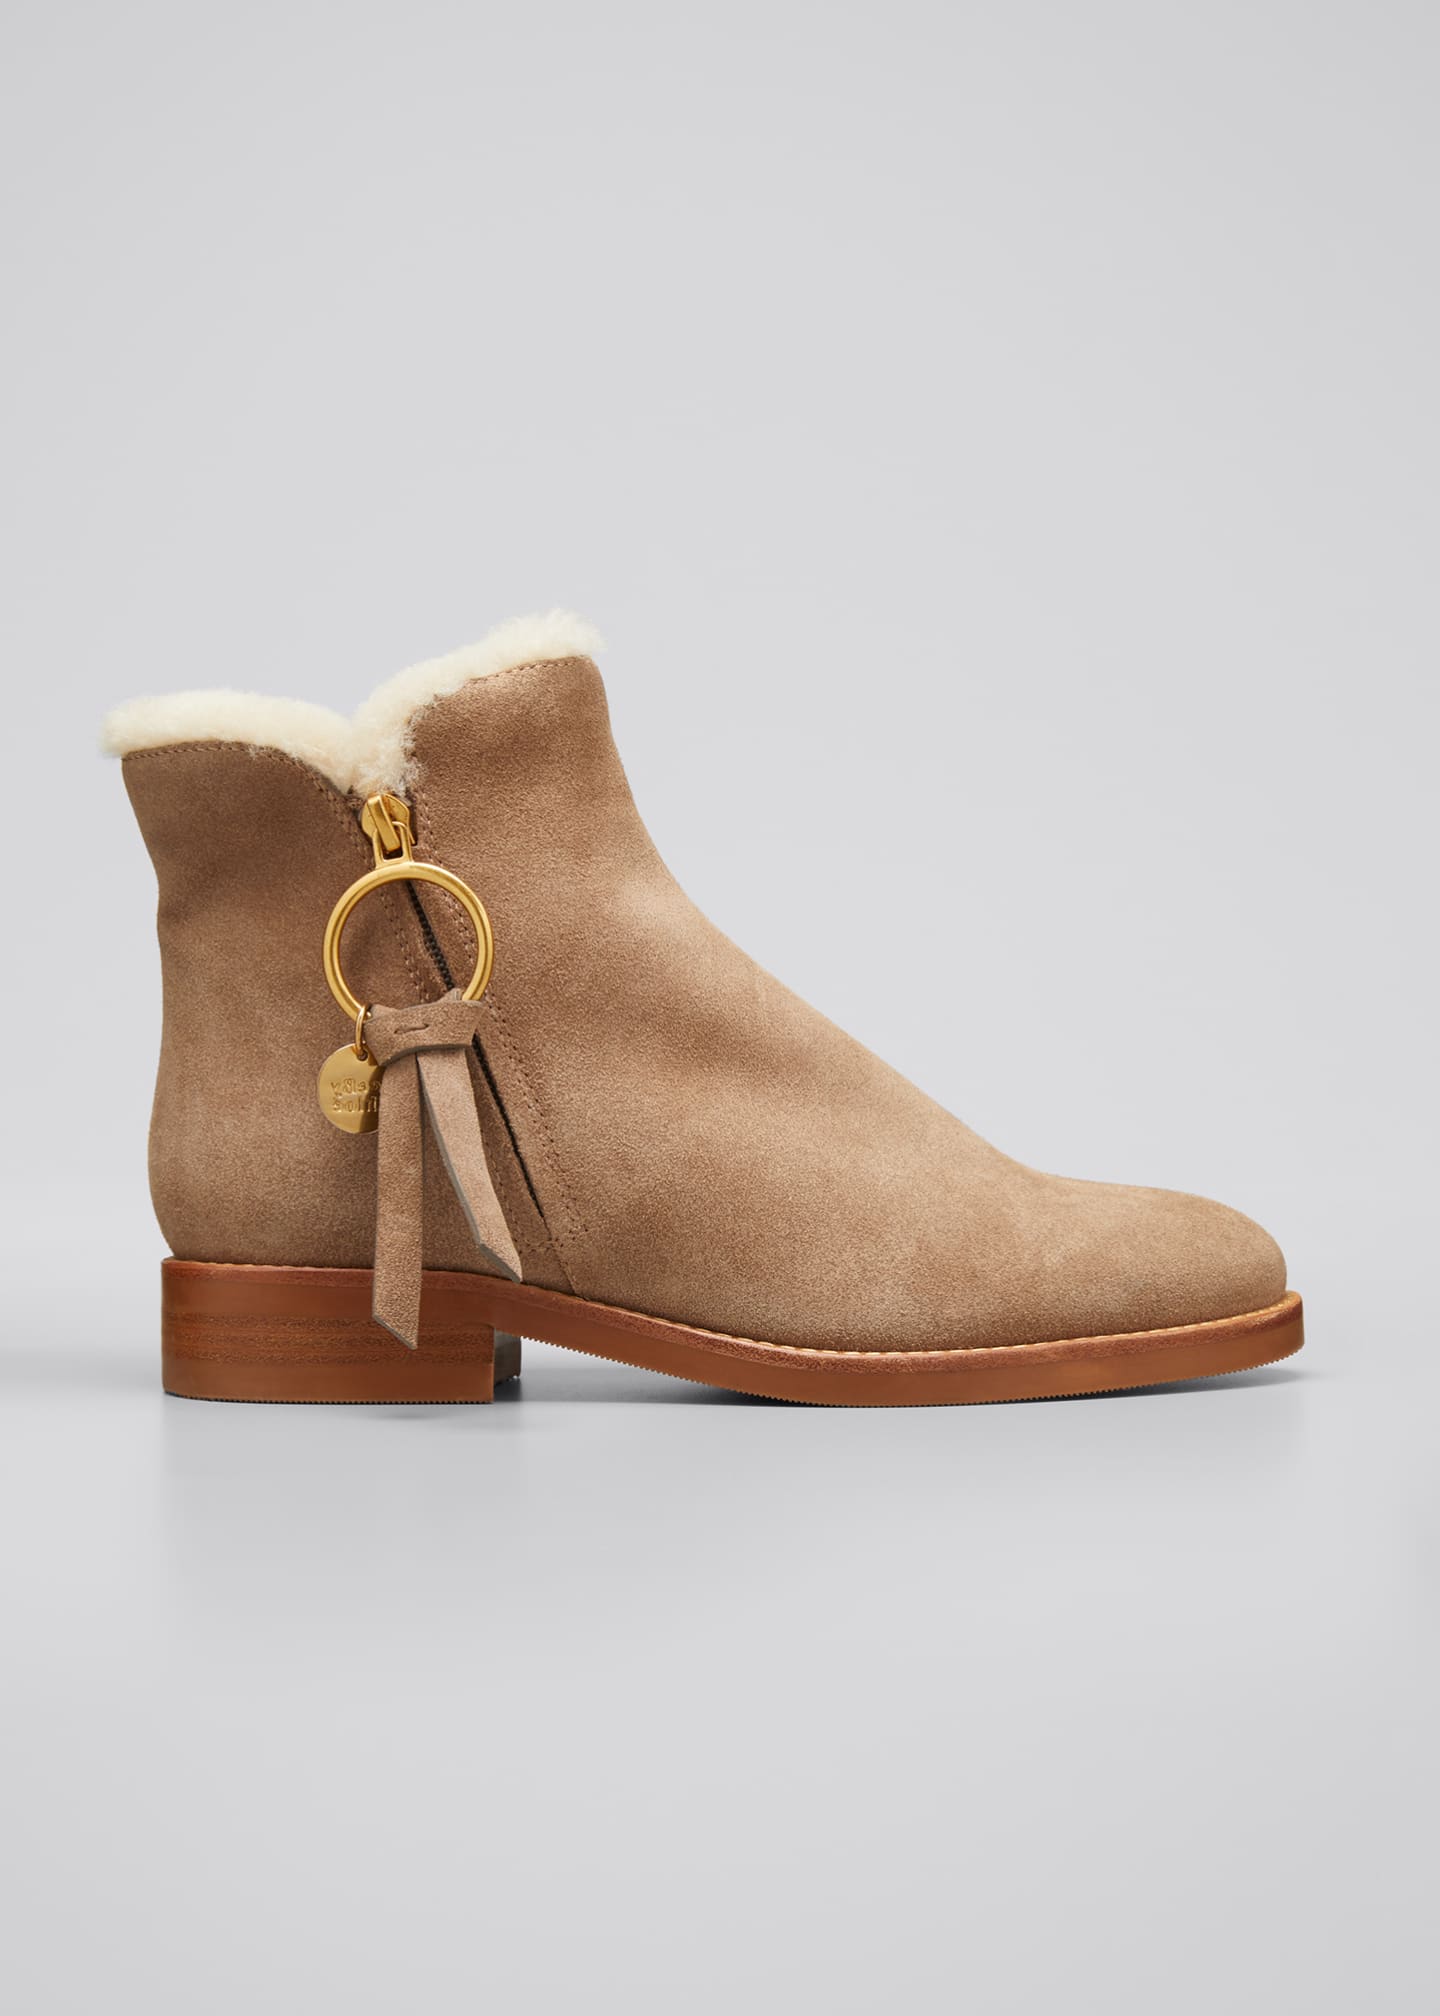 See by Chloe Louise Shearling-Lined Suede Ankle Booties - Bergdorf Goodman